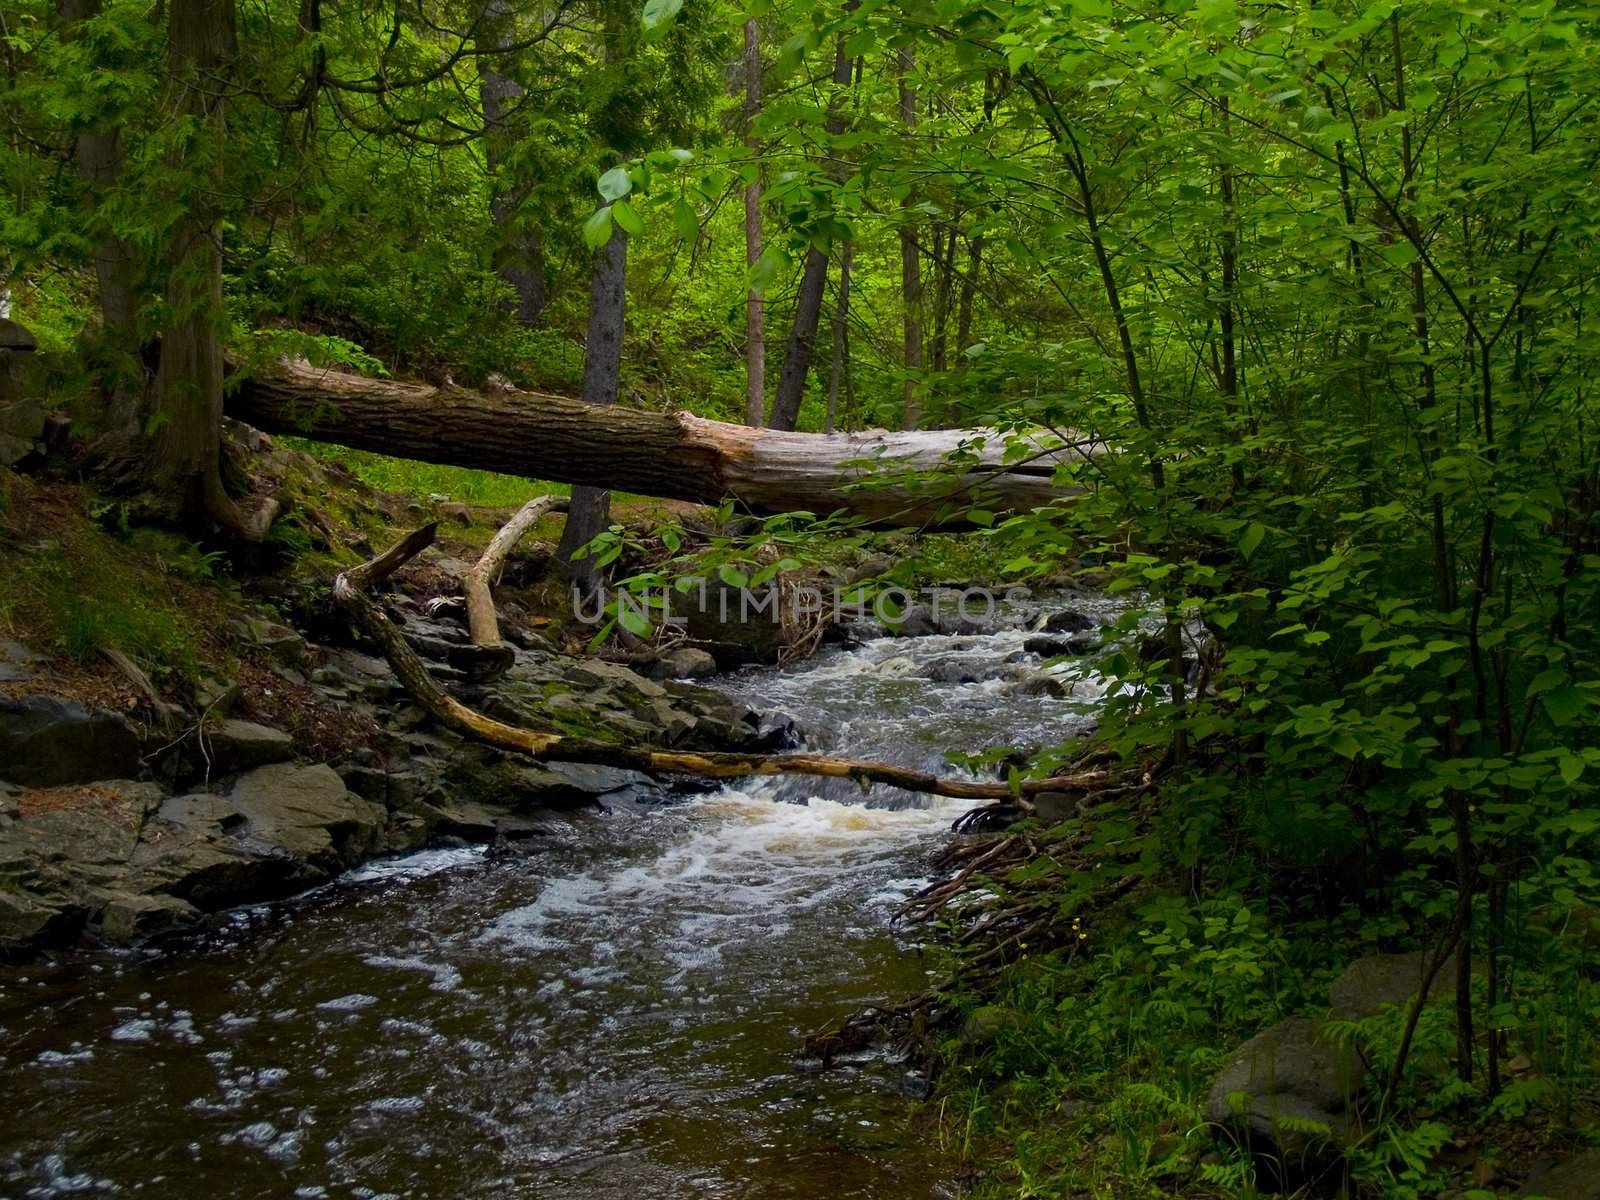 A forest brook under a fallen tree trunk in the North Woods of Minnesota.